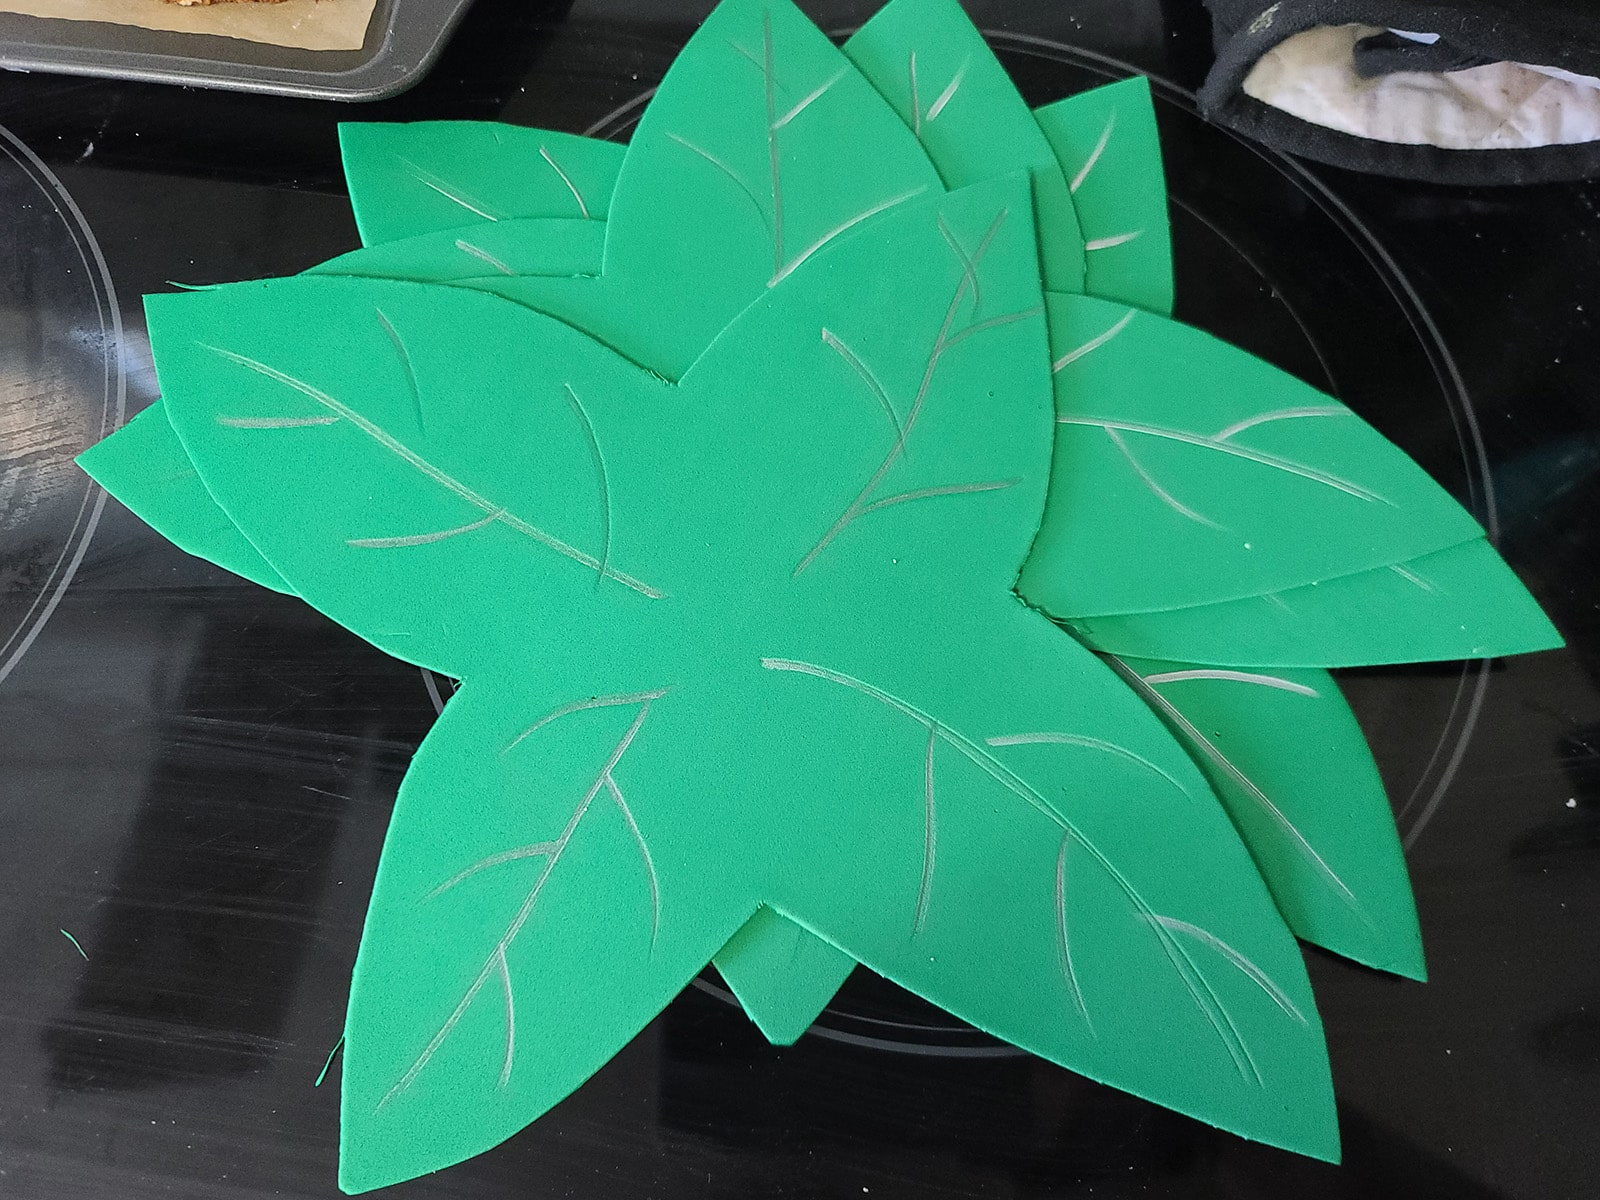 A stack of cut craft foam leaves, with silver accents drawn on.